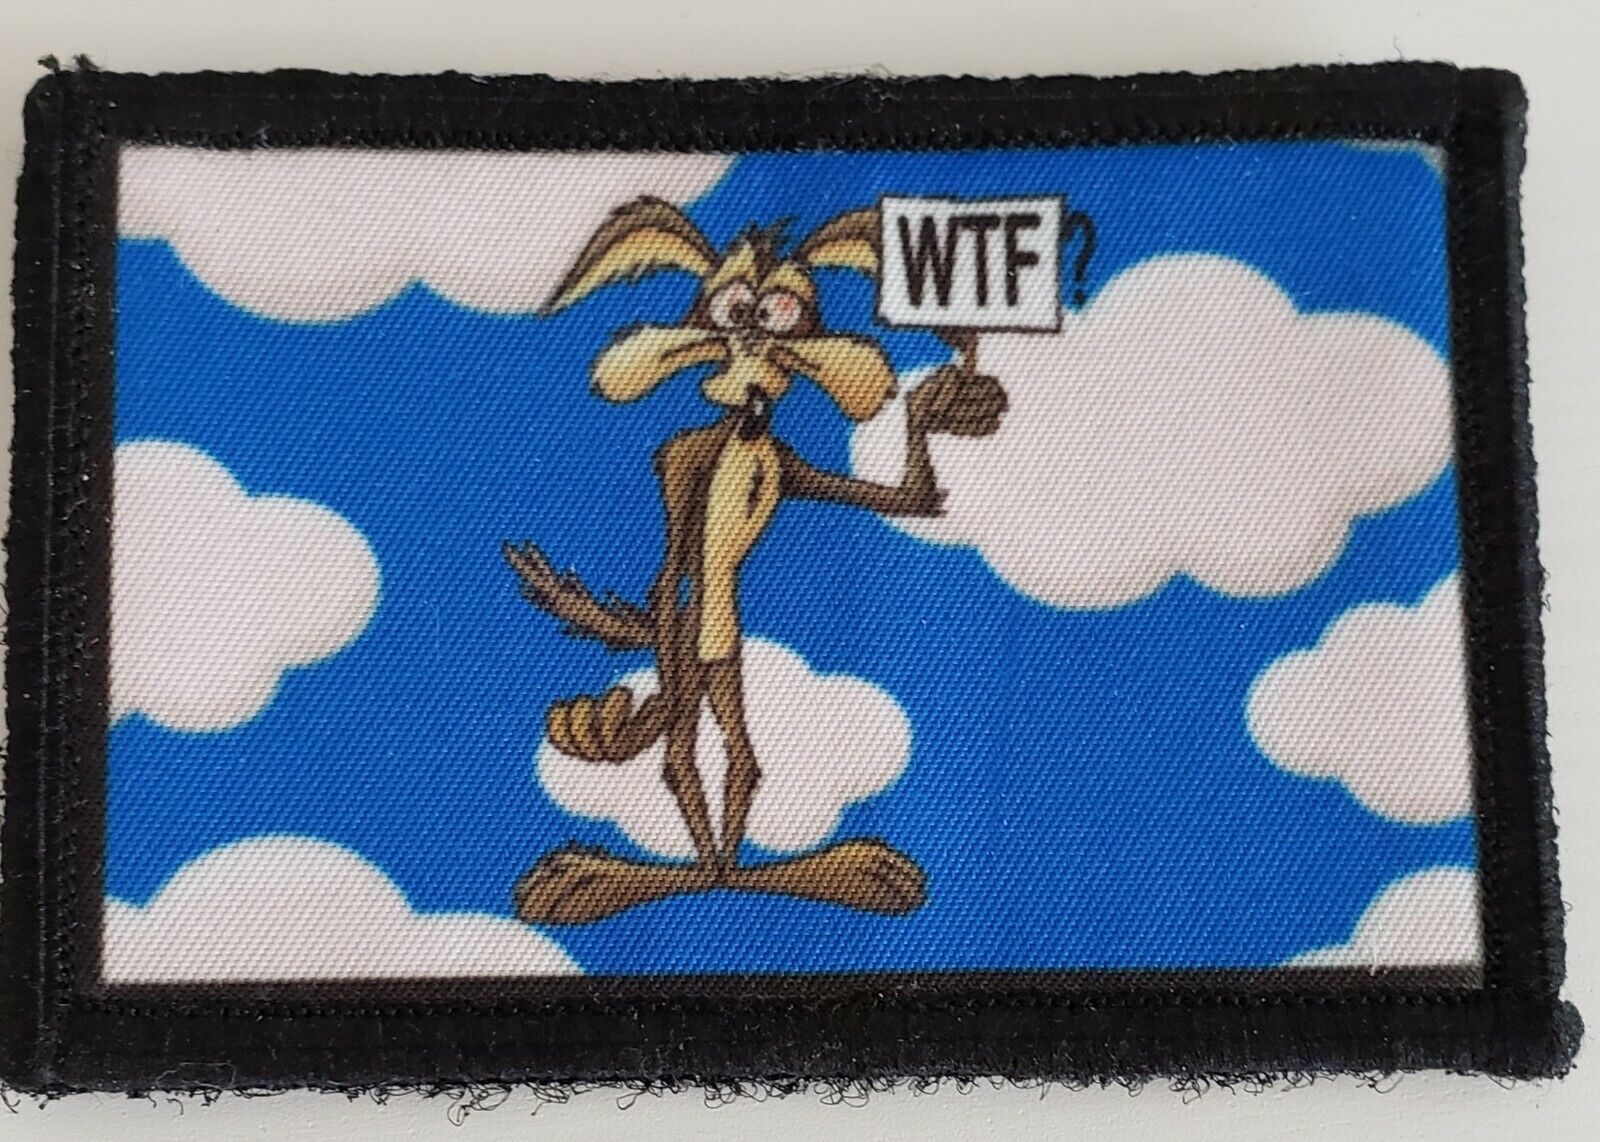 Wile E. Coyote WTF Morale Patch Tactical Army Military USA Looney Tunes 2A